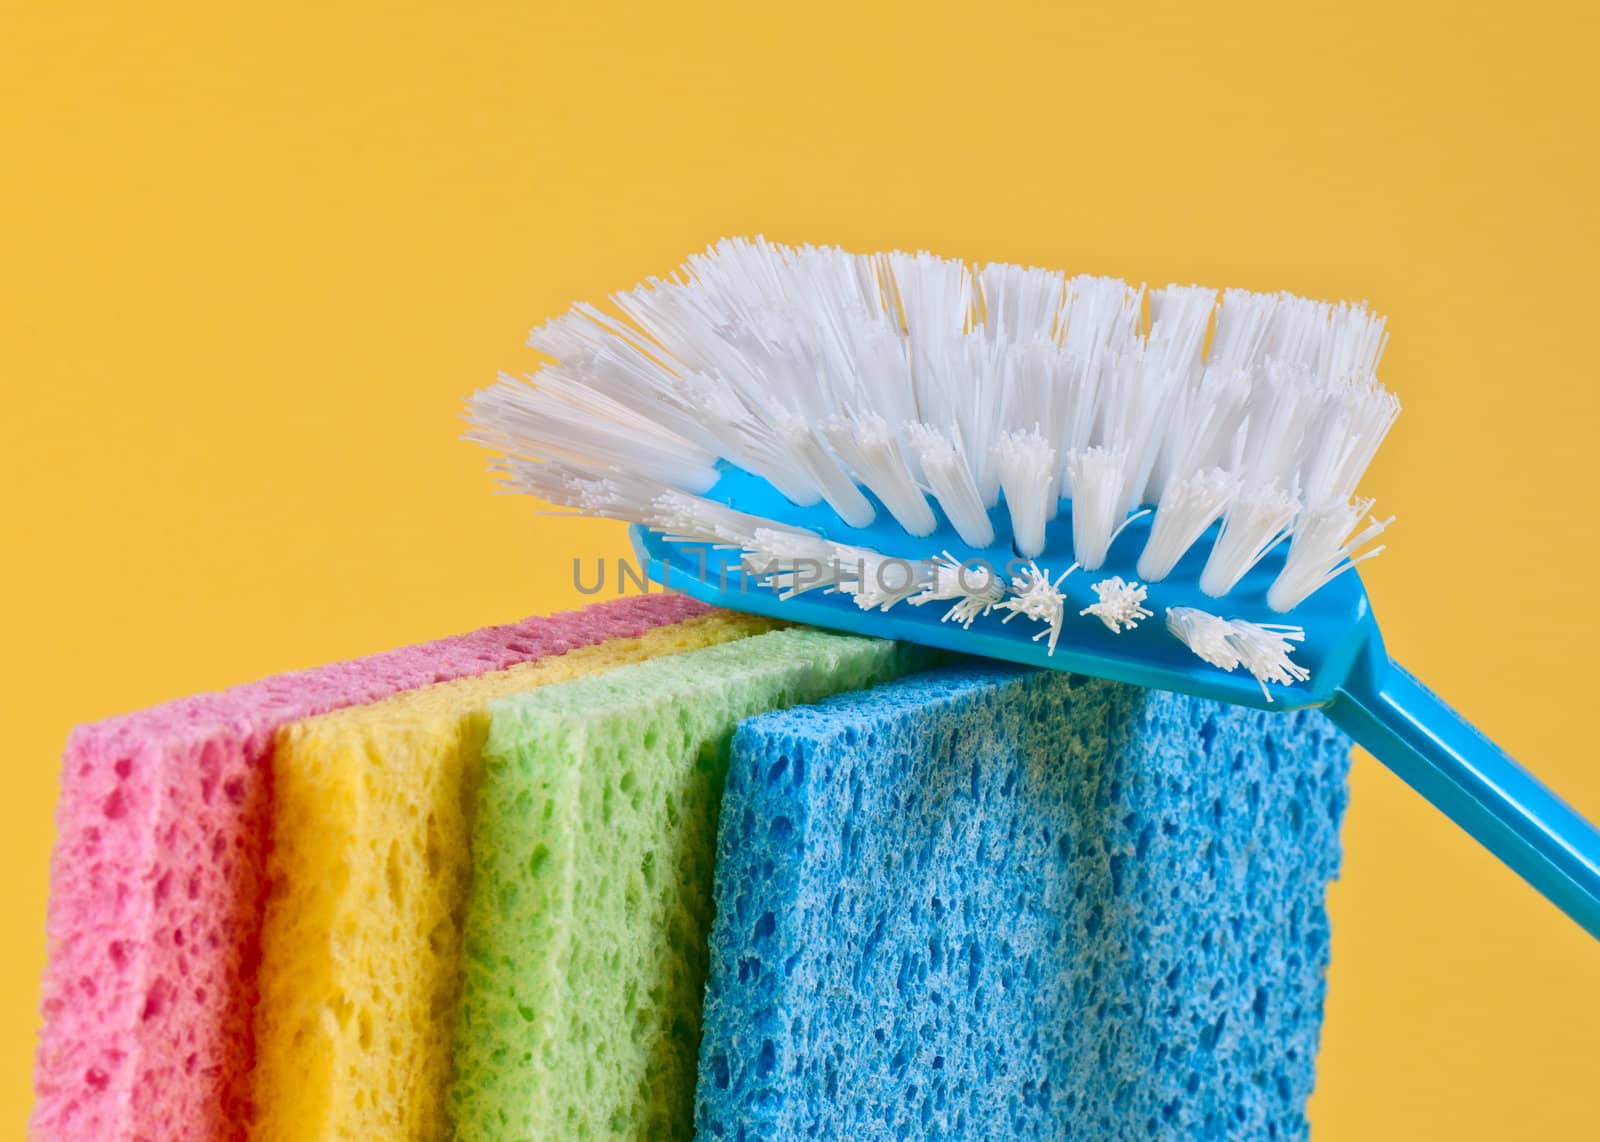 Brush and sponges for cleaning